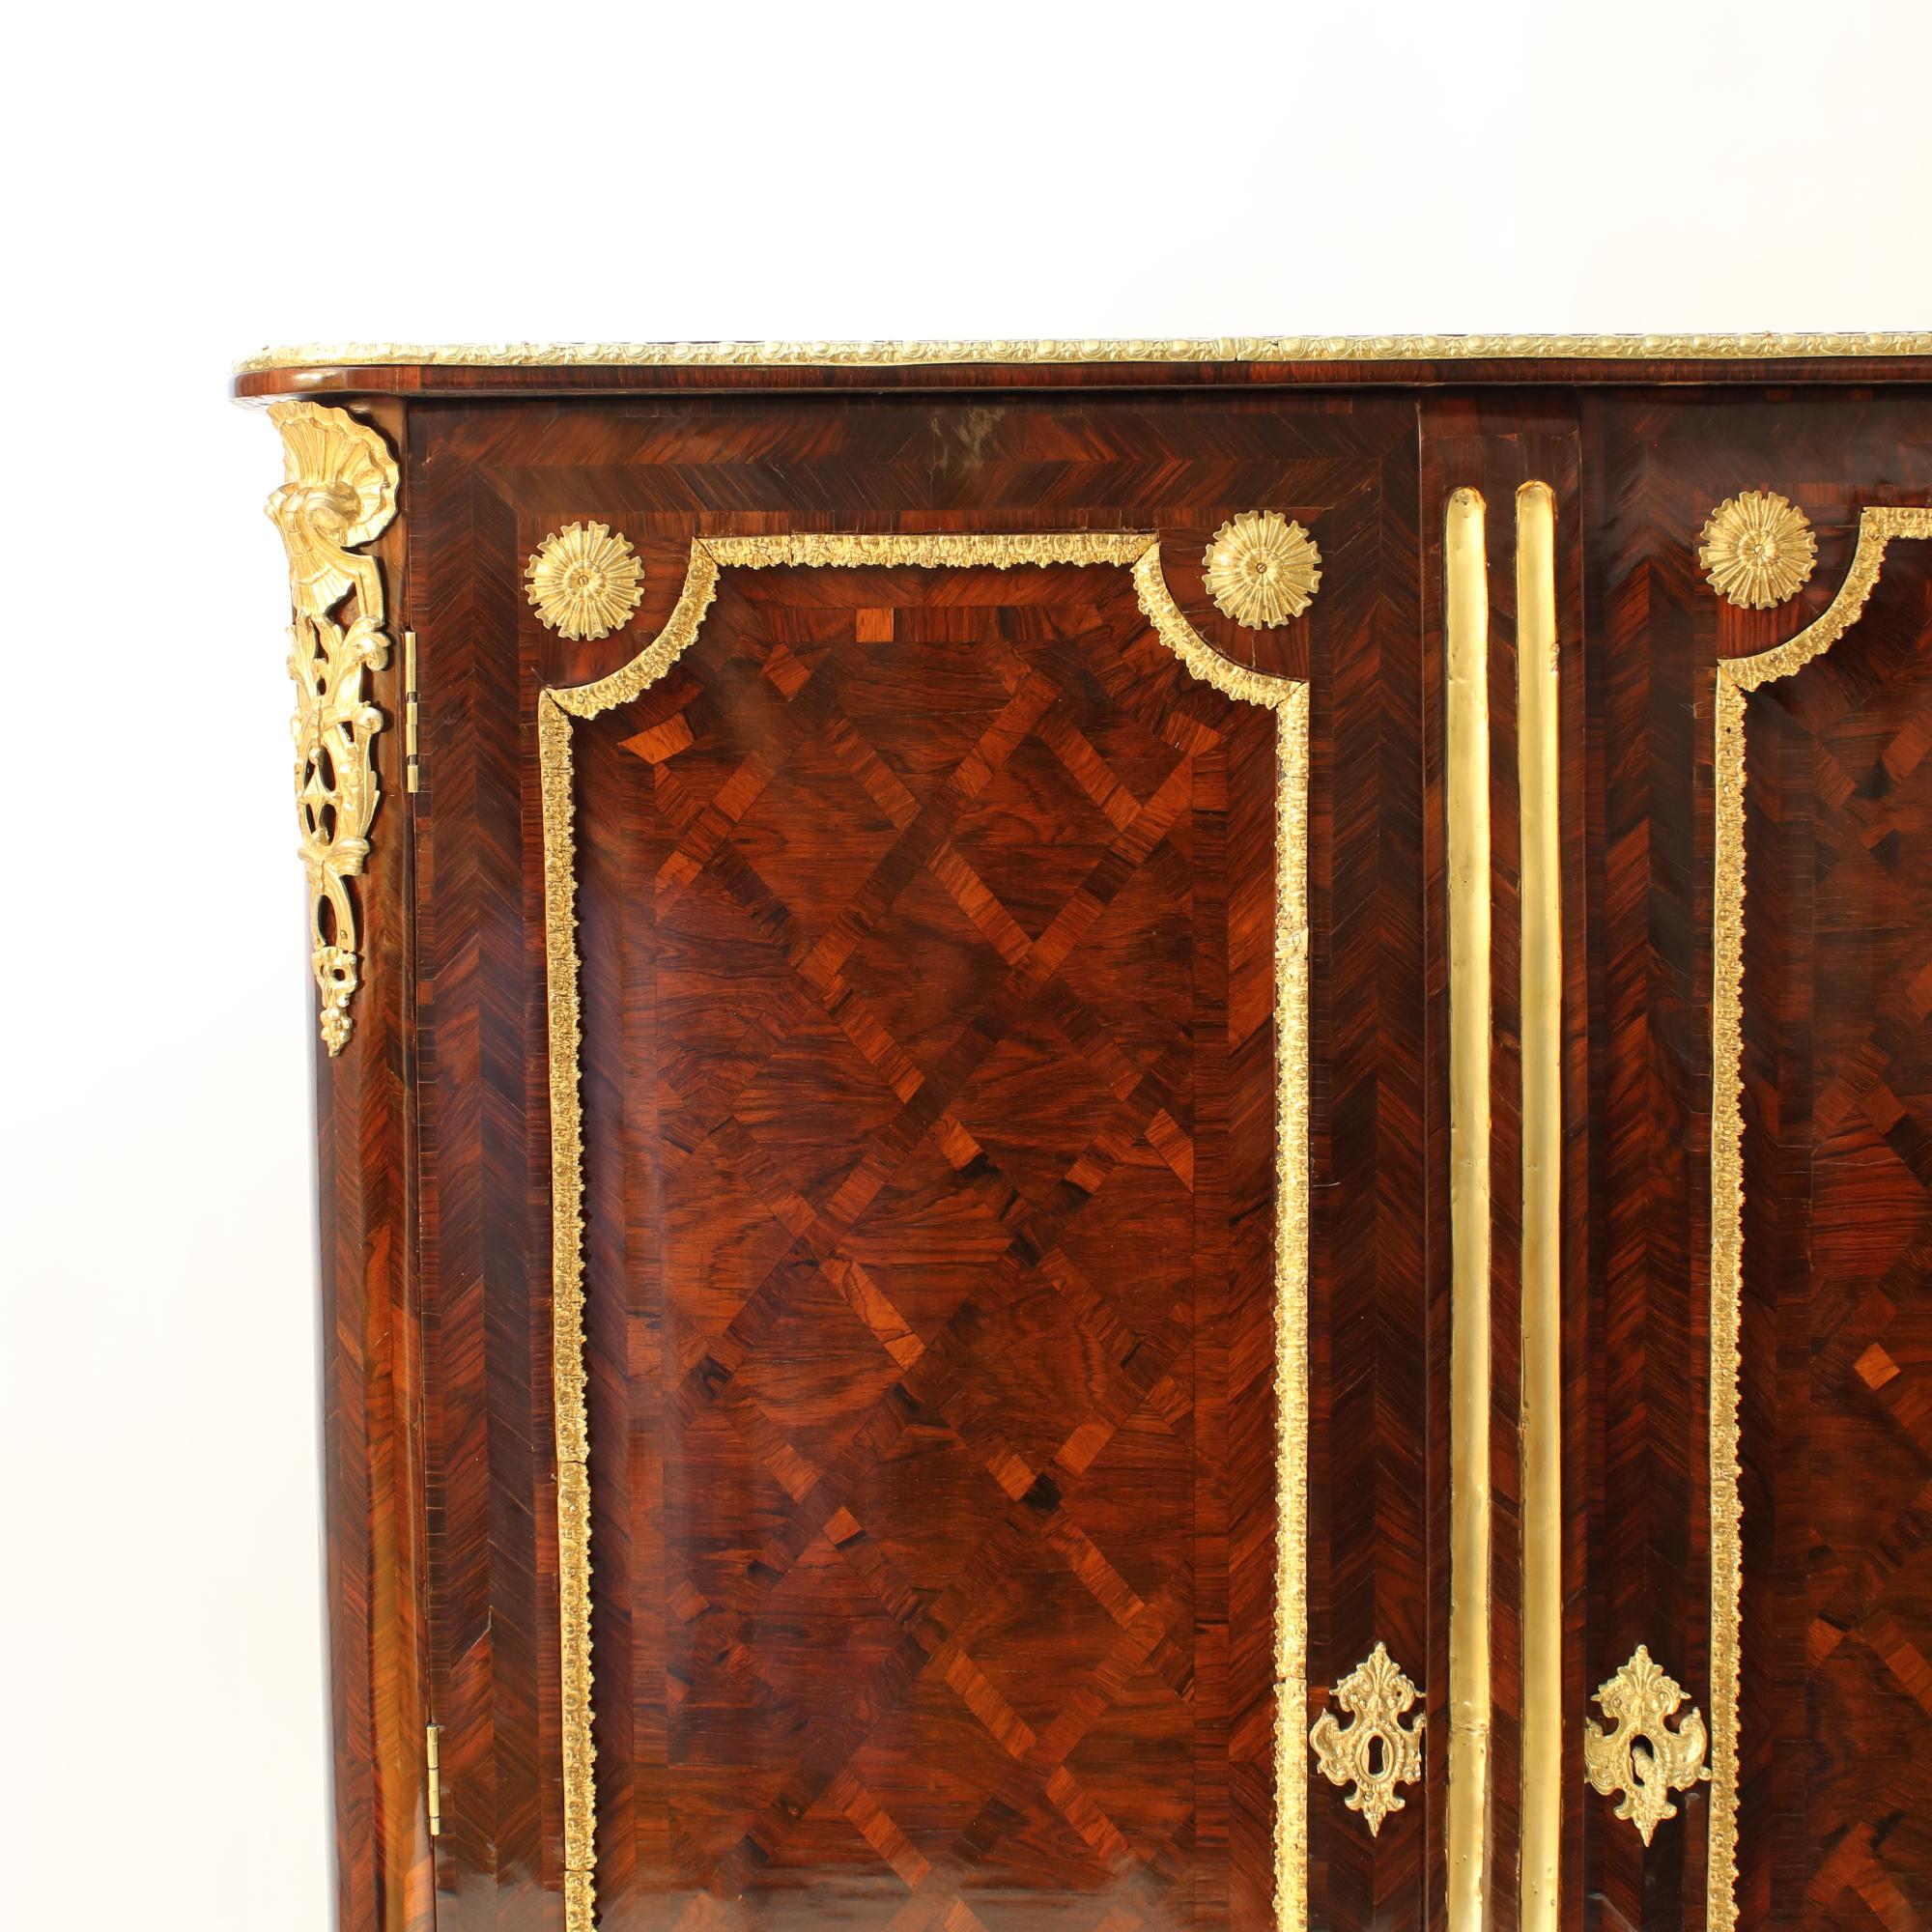 Early 18th Century French Louis XIV Régence Trellis Marquetry Armoire Wardrobe For Sale 7